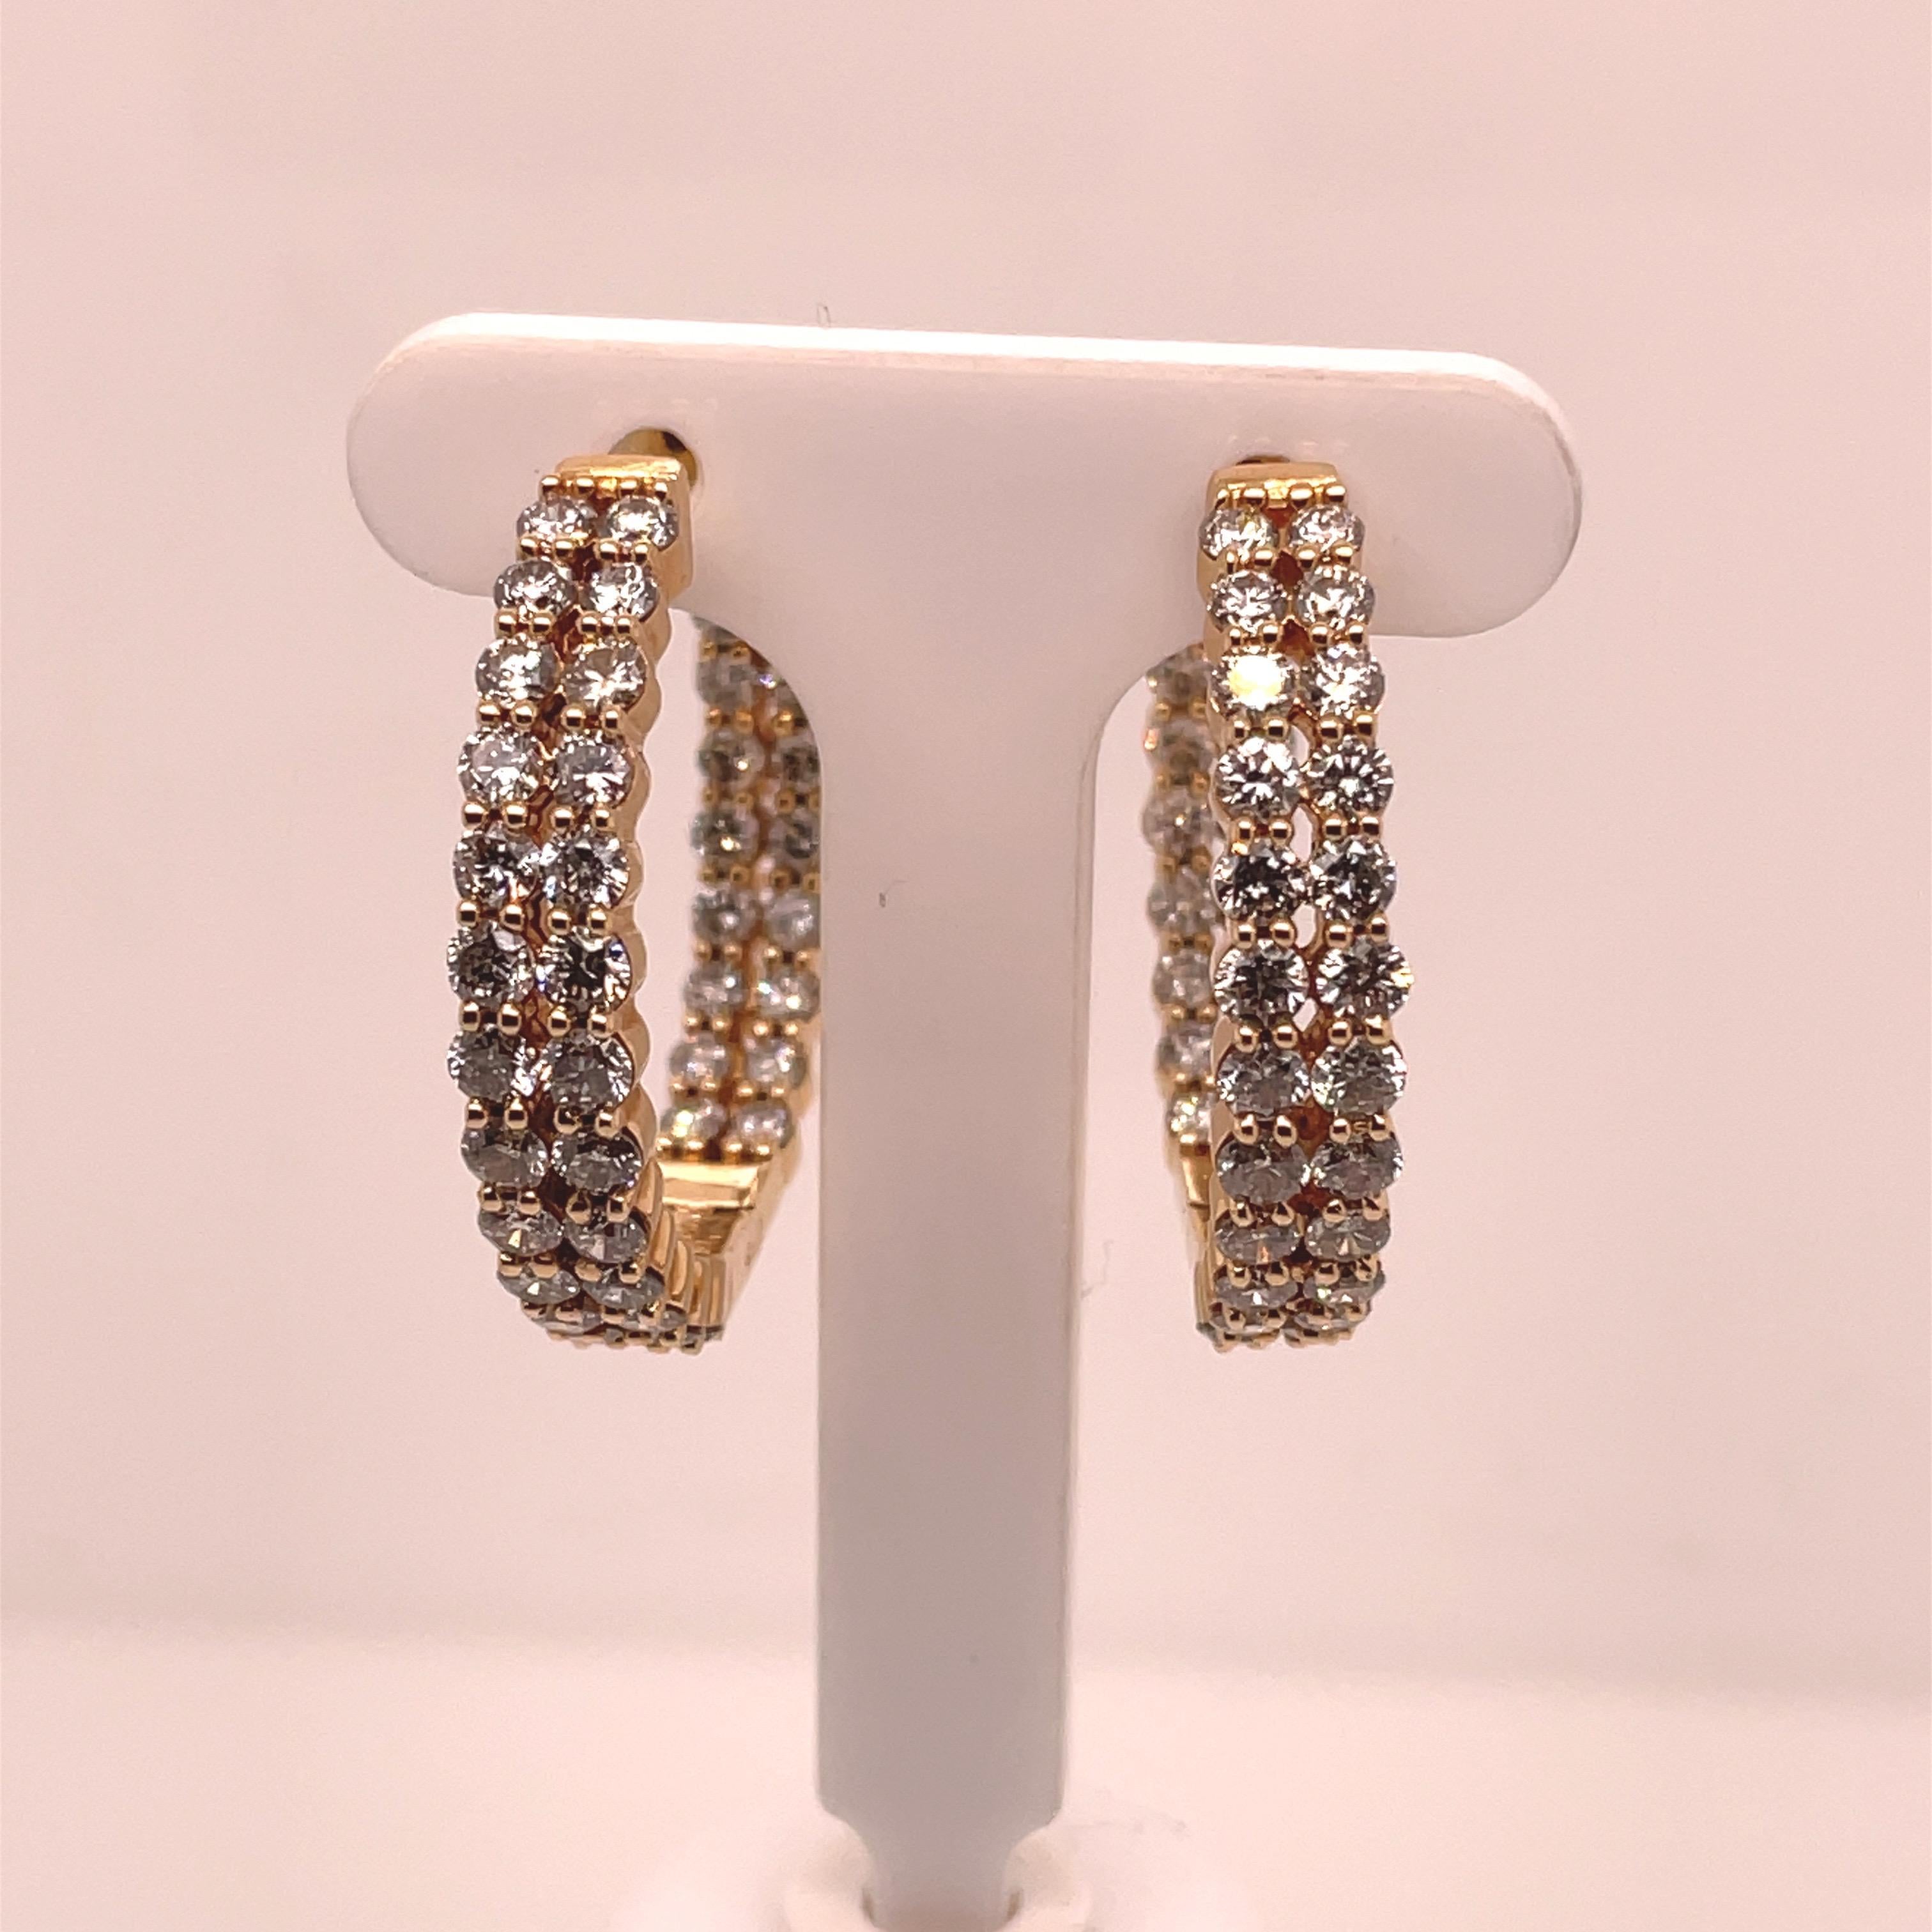 Four Carats of Diamonds in these gorgeous double row yellow gold hoops.  14K yellow gold.